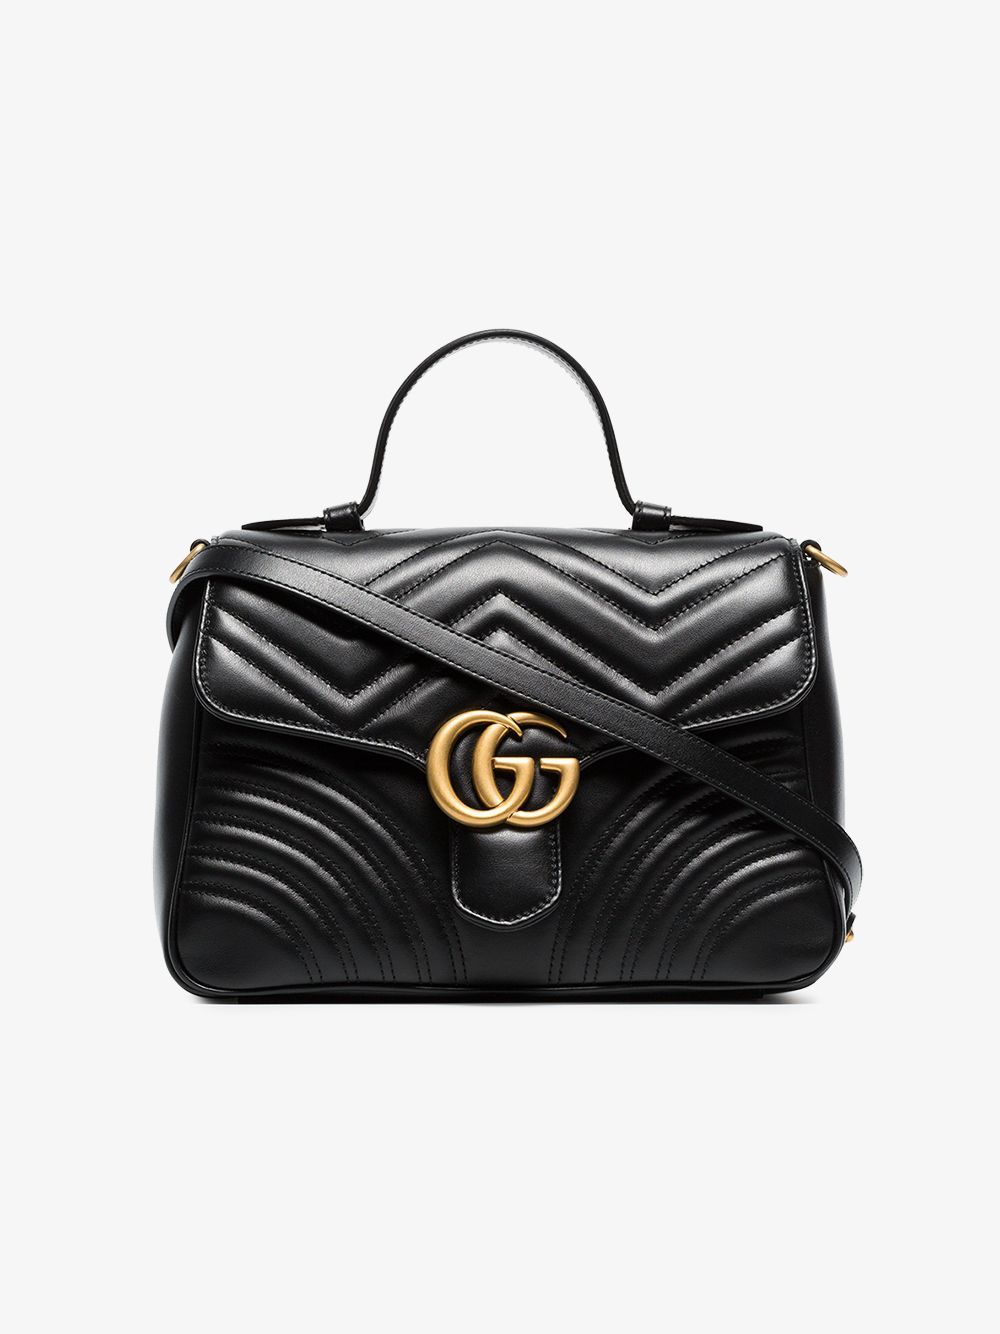 Gucci black GG marmont large leather top handle bag | Browns Fashion